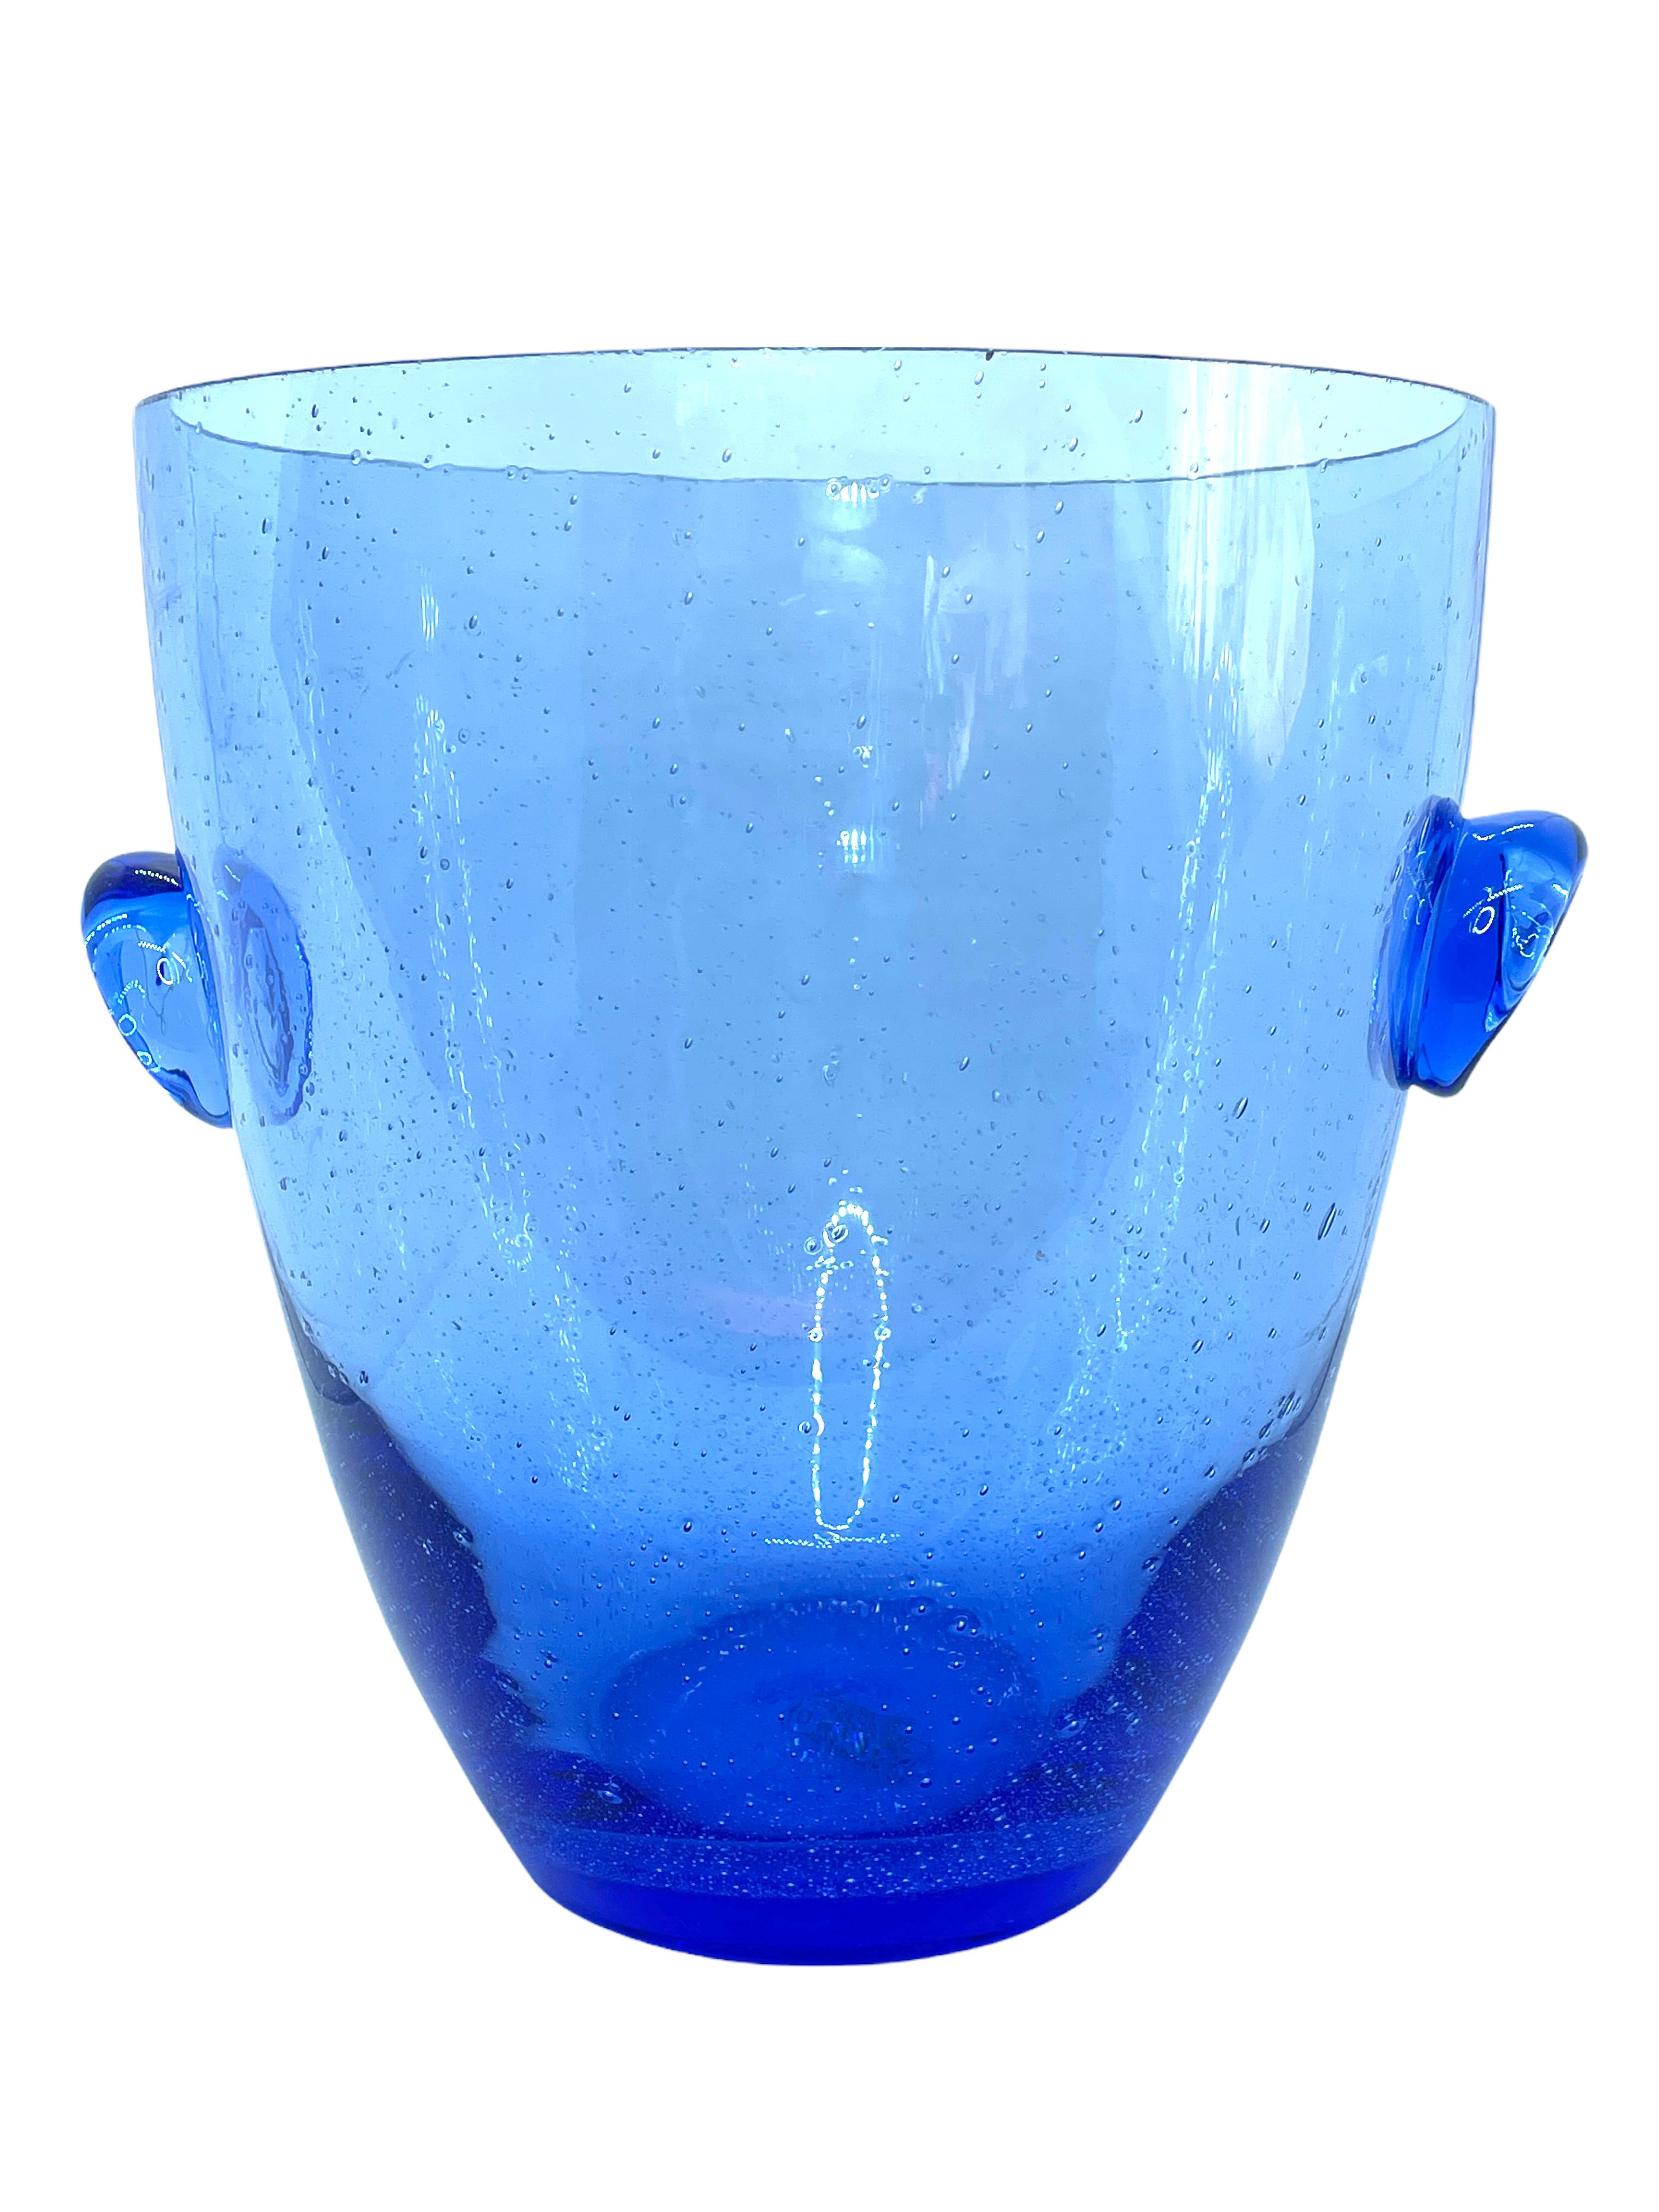 Late 20th Century Mid-Century Modern Murano Glass Champagne Cooler Ice Bucket, Germany, 1950s